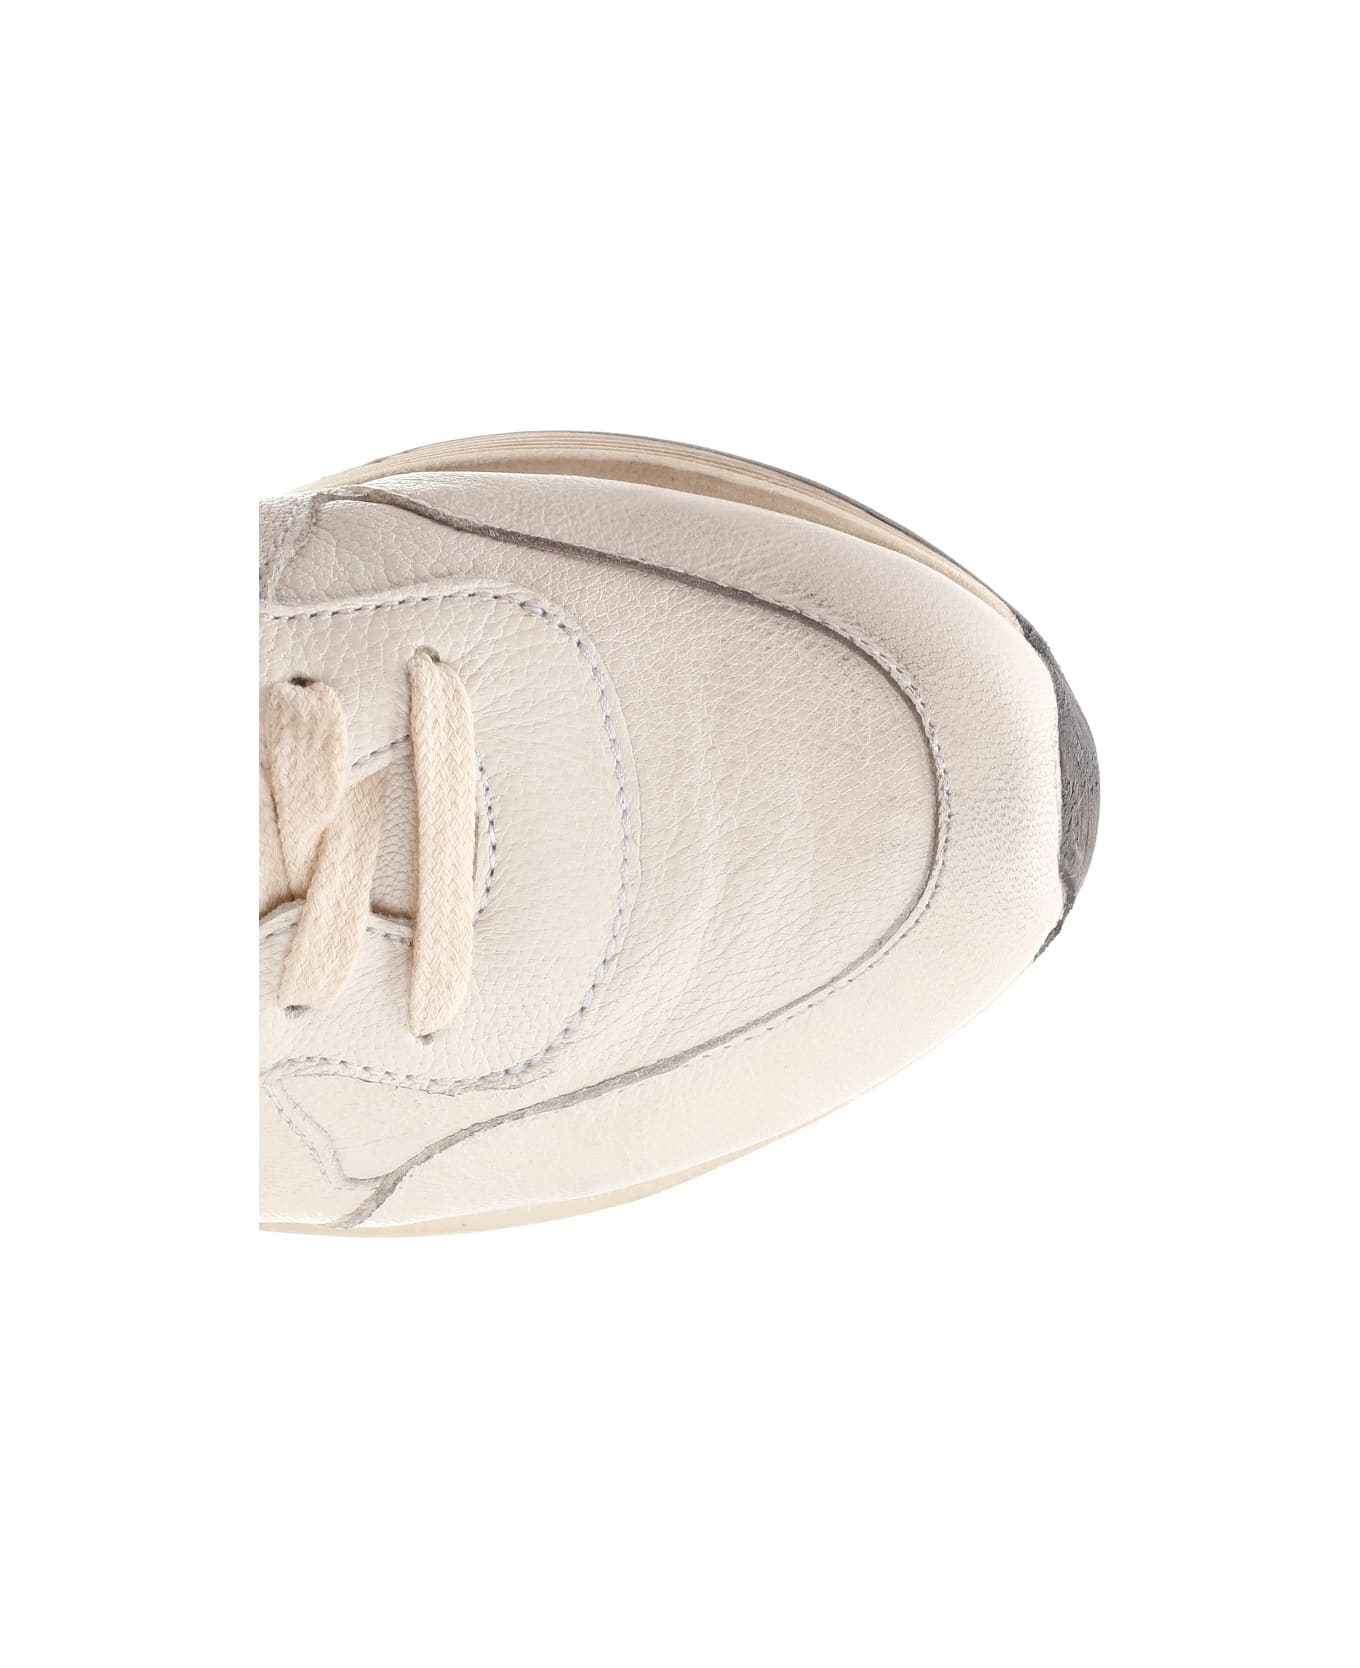 Golden Goose Running Sole Sneakers - White/Silver/Gold スニーカー